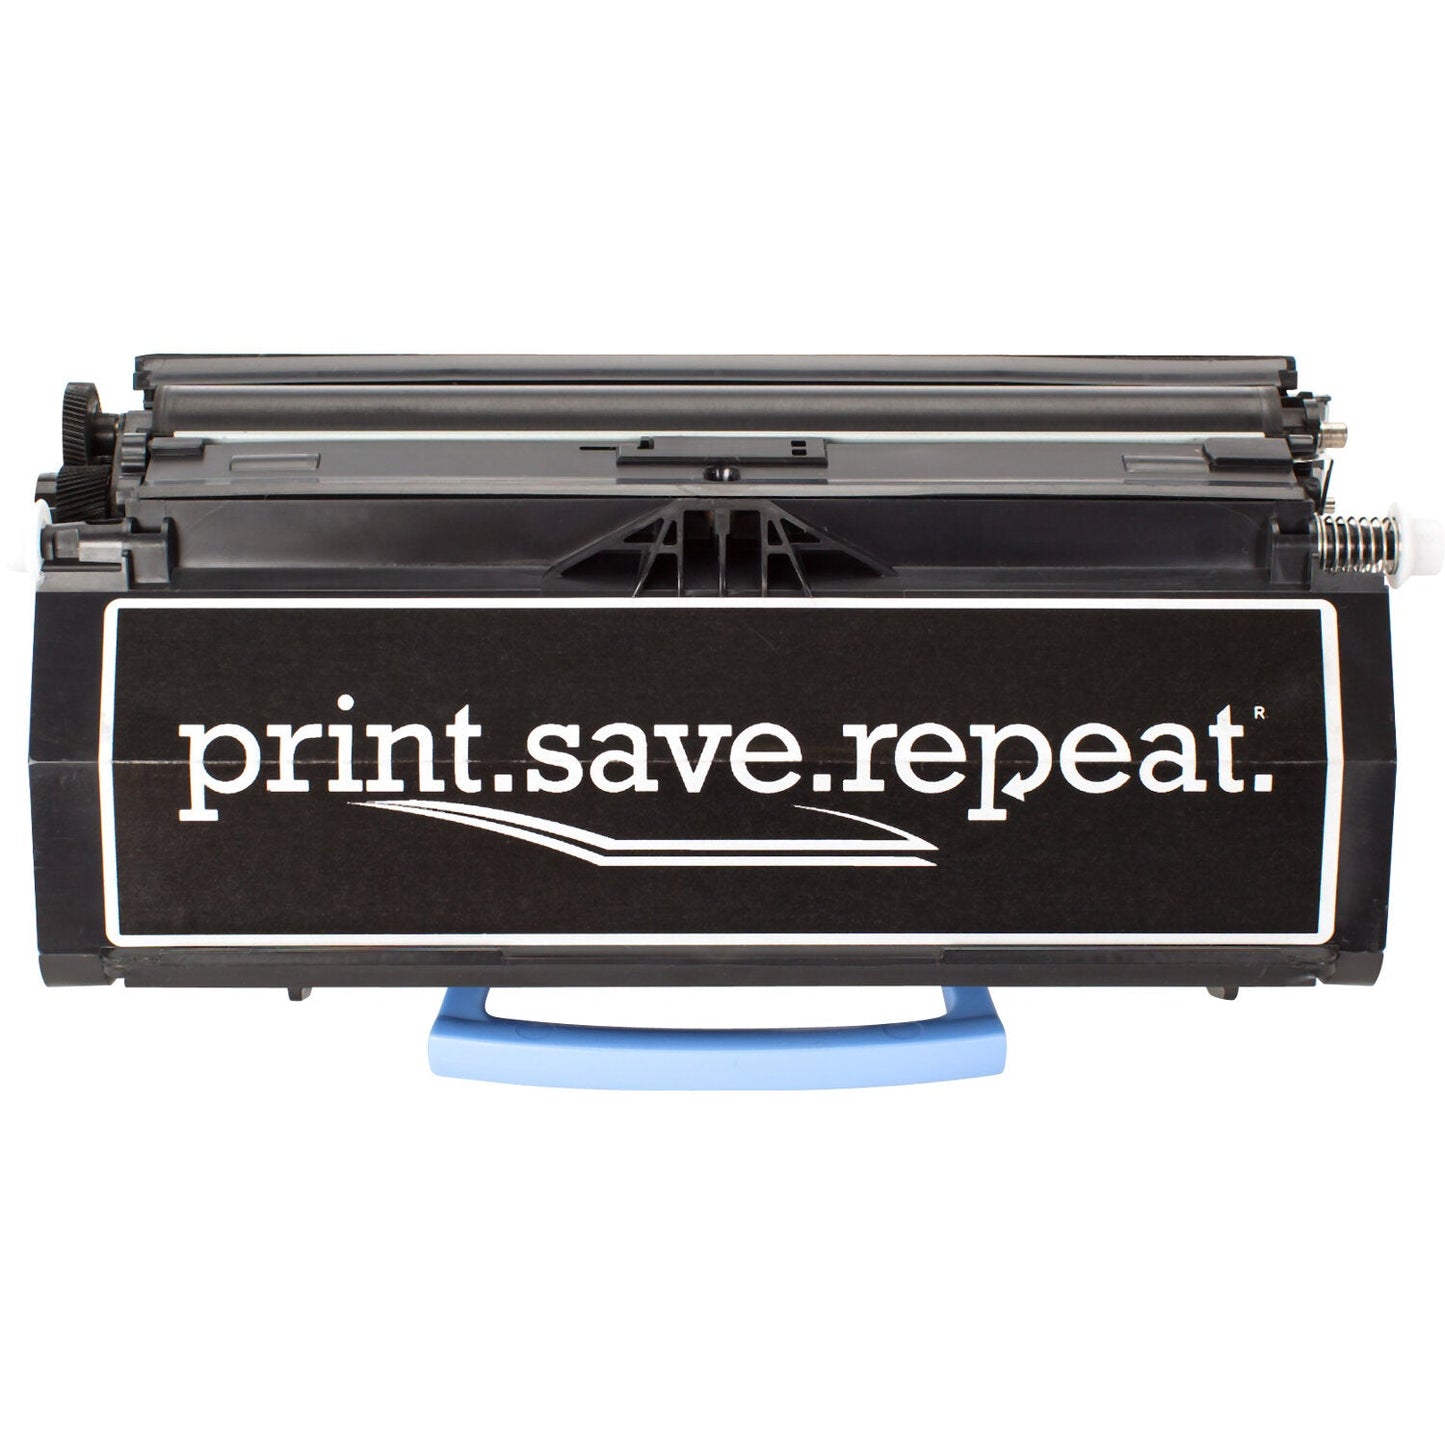 Print.Save.Repeat. Lexmark X264H11G High Yield Remanufactured Toner Cartridge for X264, X363, X364 [9,000 Pages]